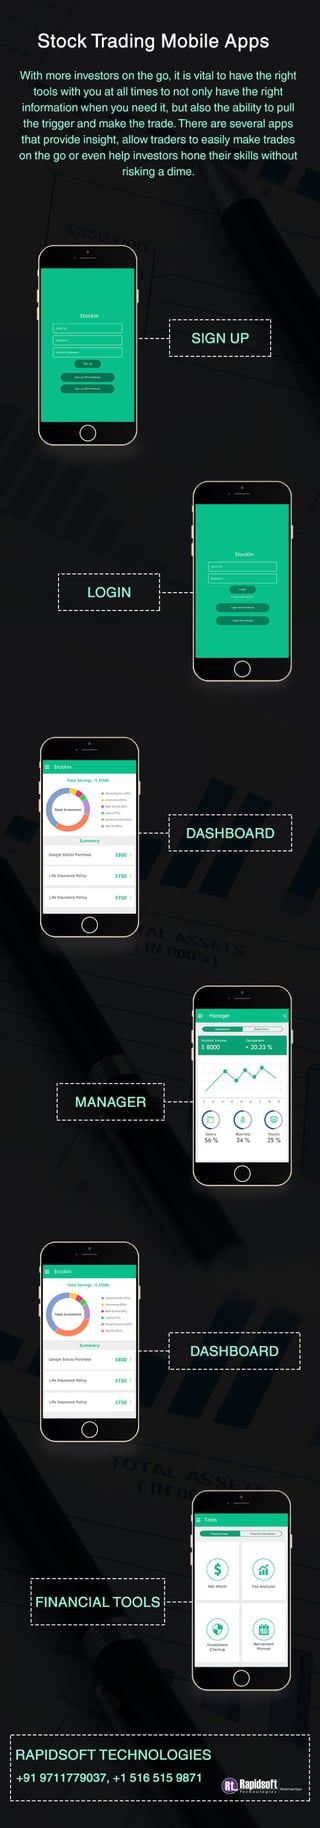 Stock Trading App Interface Design for Android and Iphone